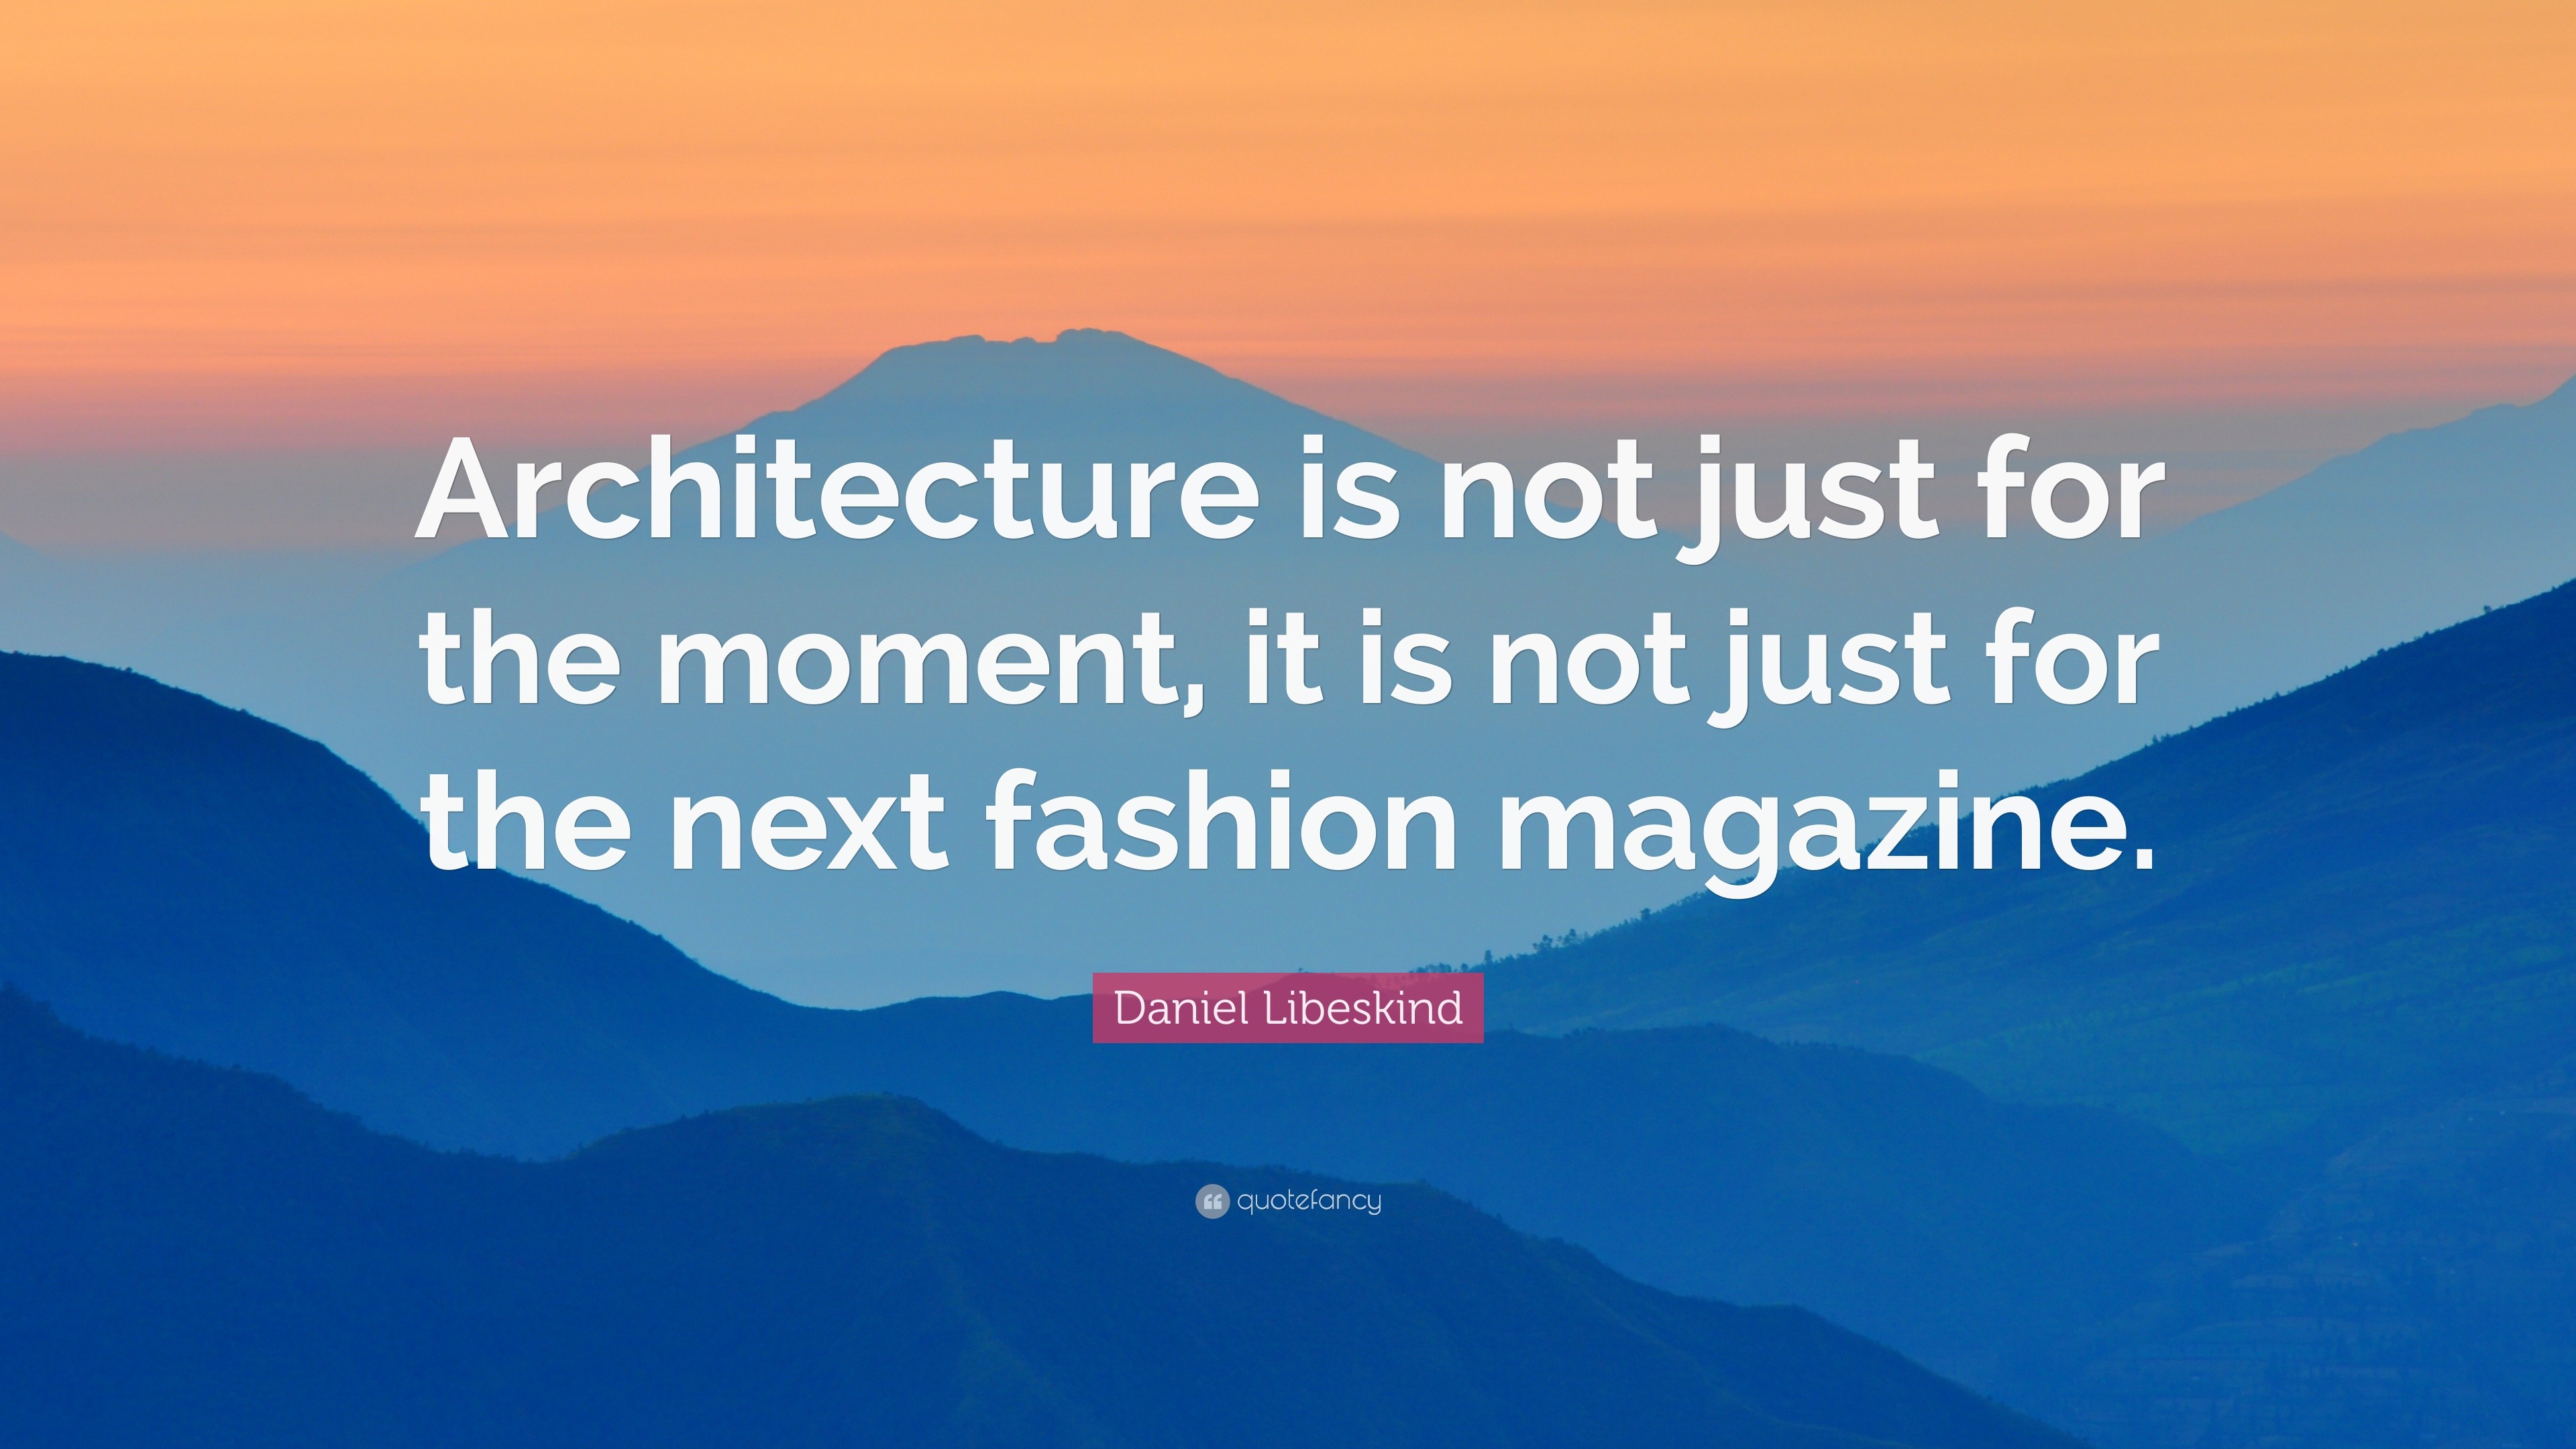 Daniel Libeskind Quote: “Architecture is not just for the moment, it is ...